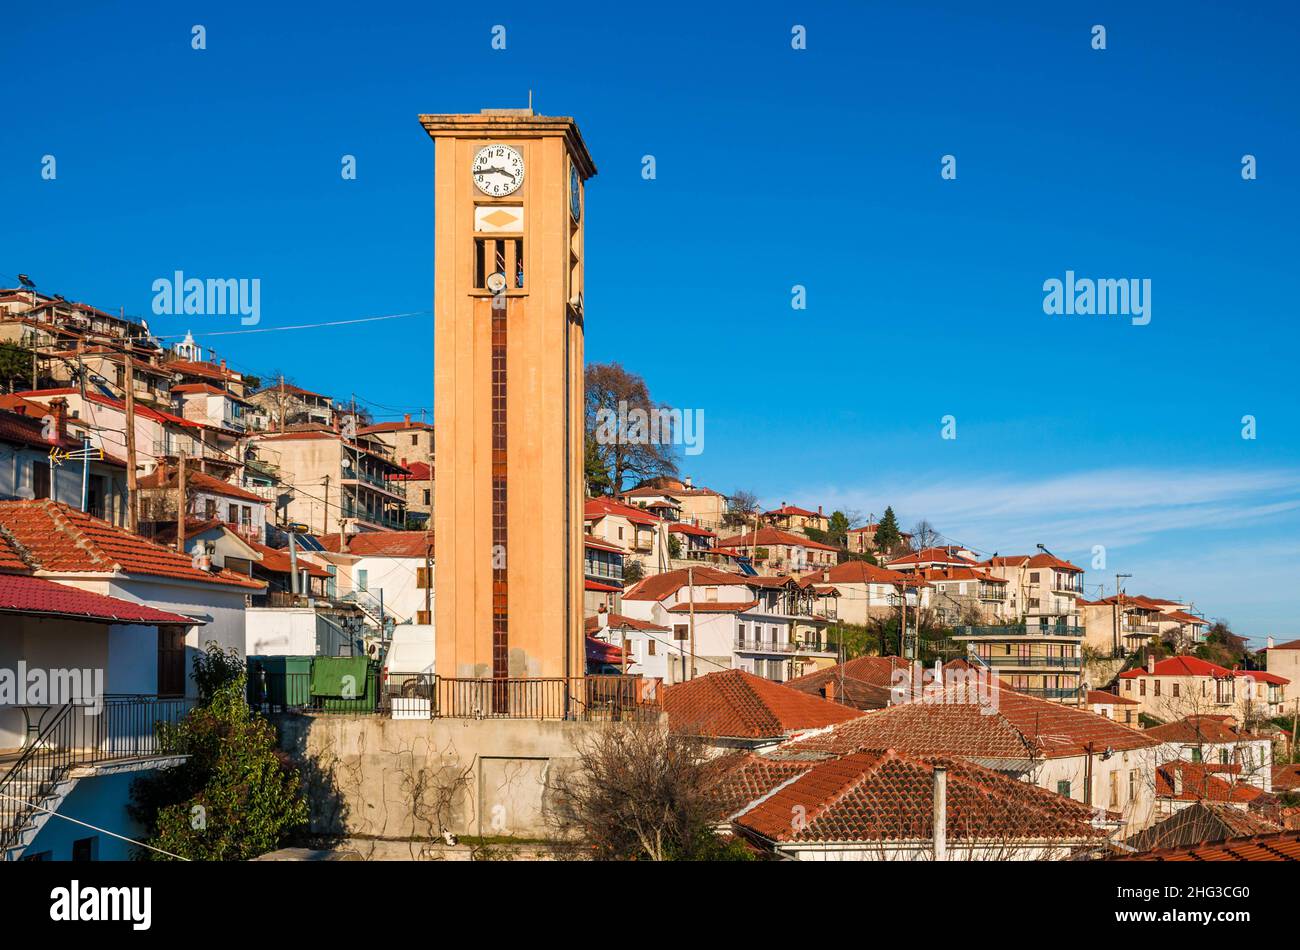 Rapsani, the beautiful village in the foothills of Mount Olympus and part of the municipality of Tempi in the Larissa regional unit. Stock Photo